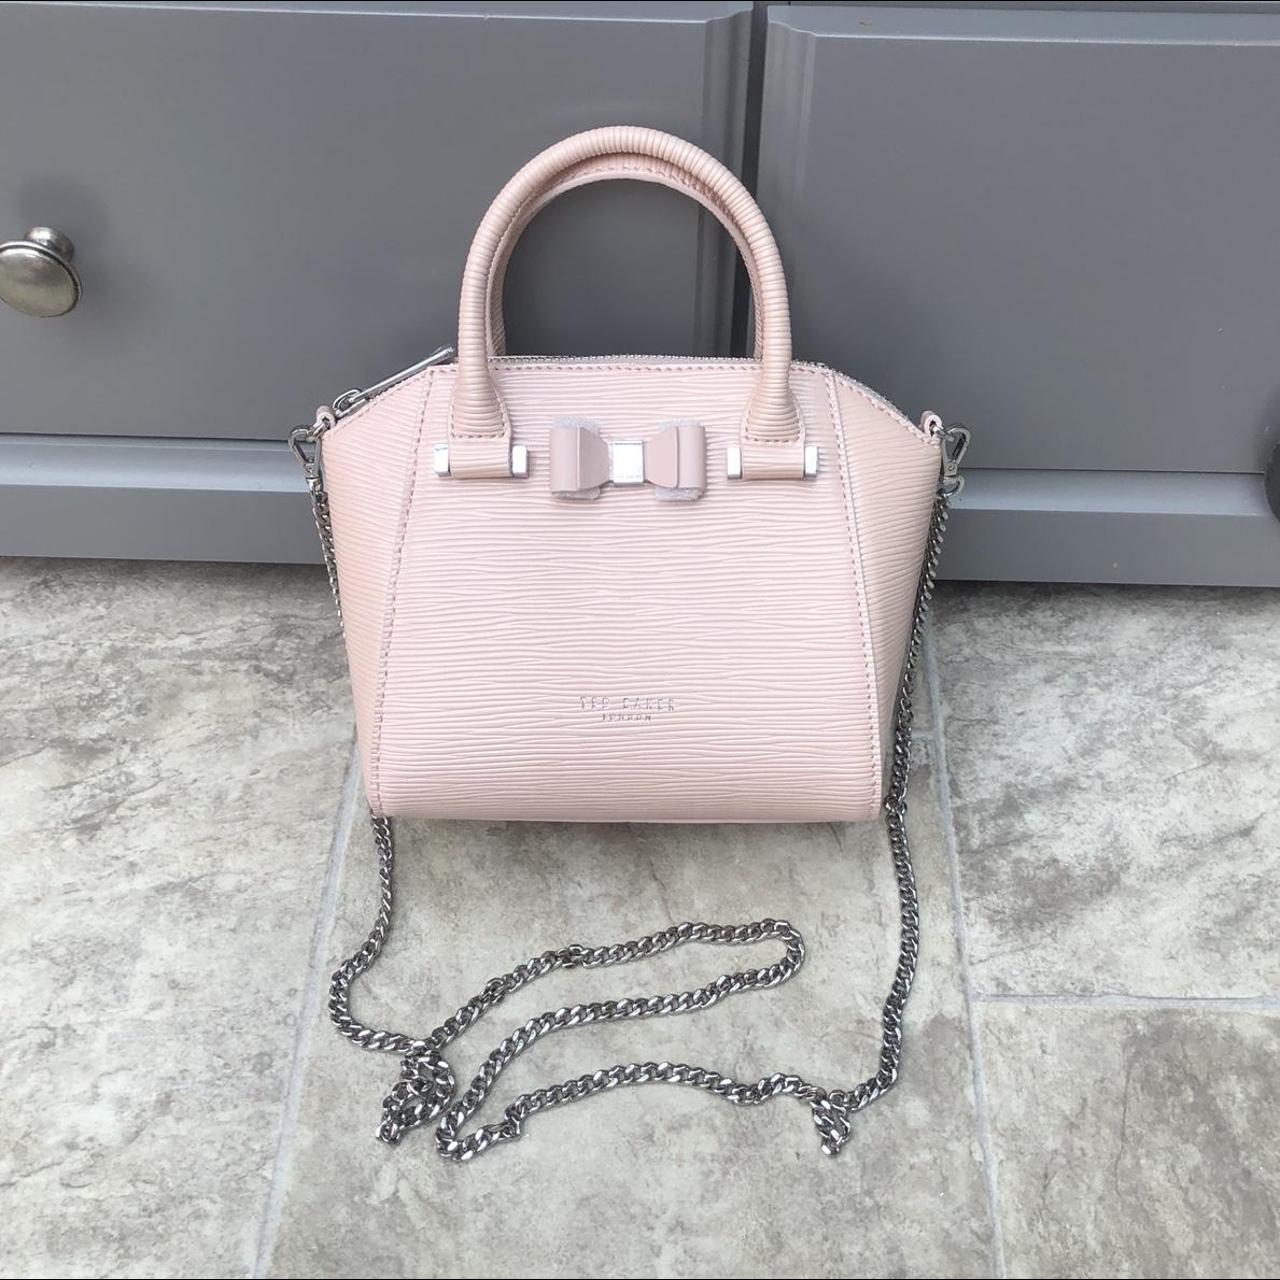 Ted Baker Women's Pink and Silver Bag | Depop